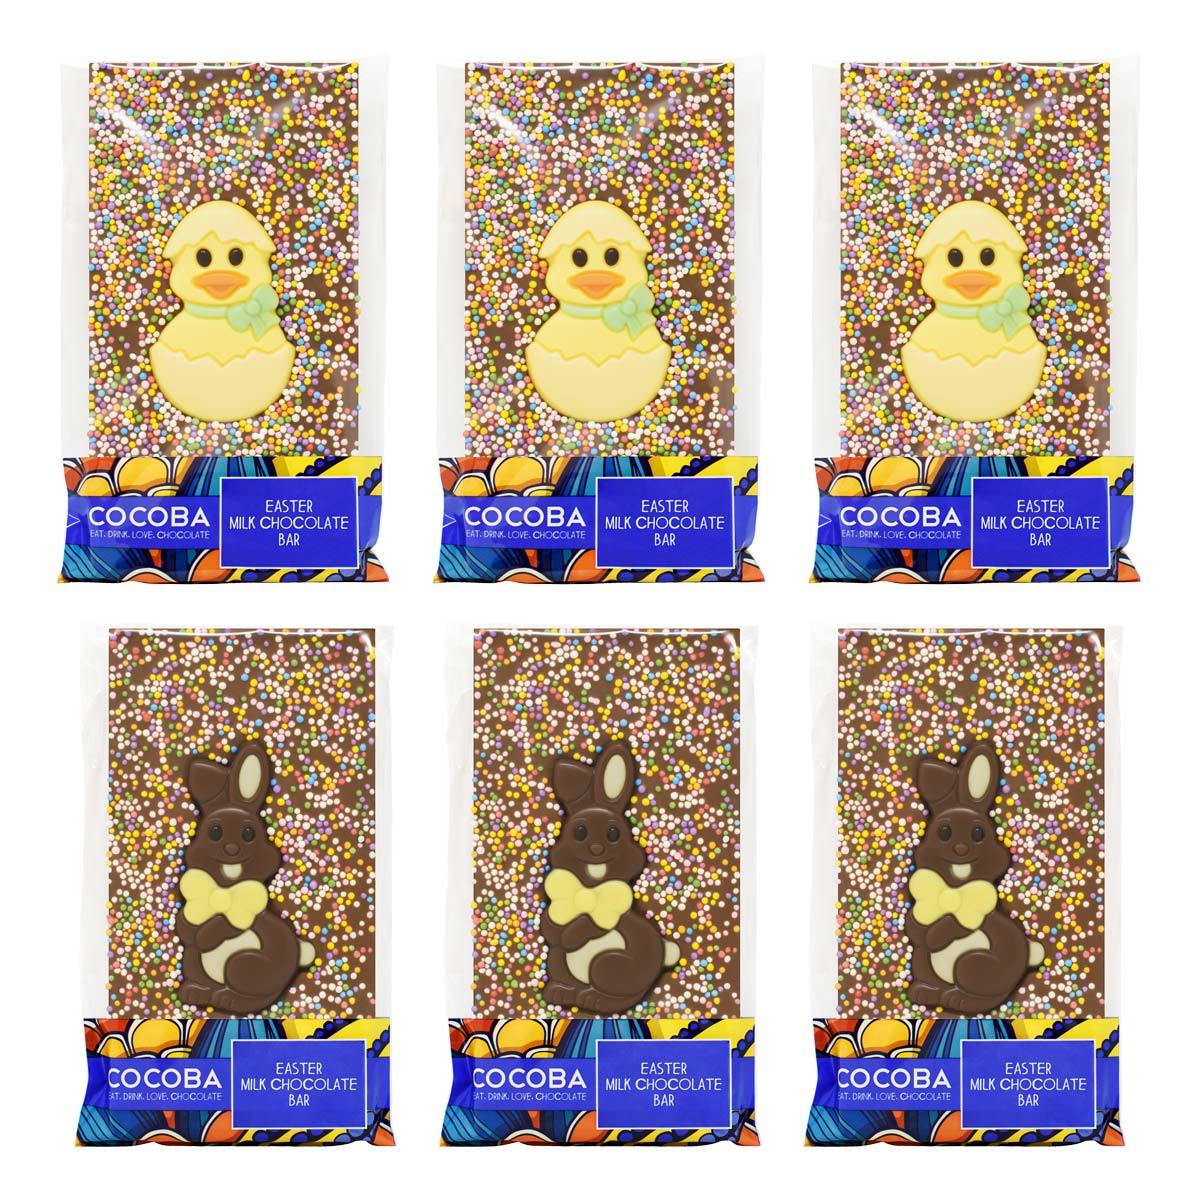 6 Easter Character bars in wrappers